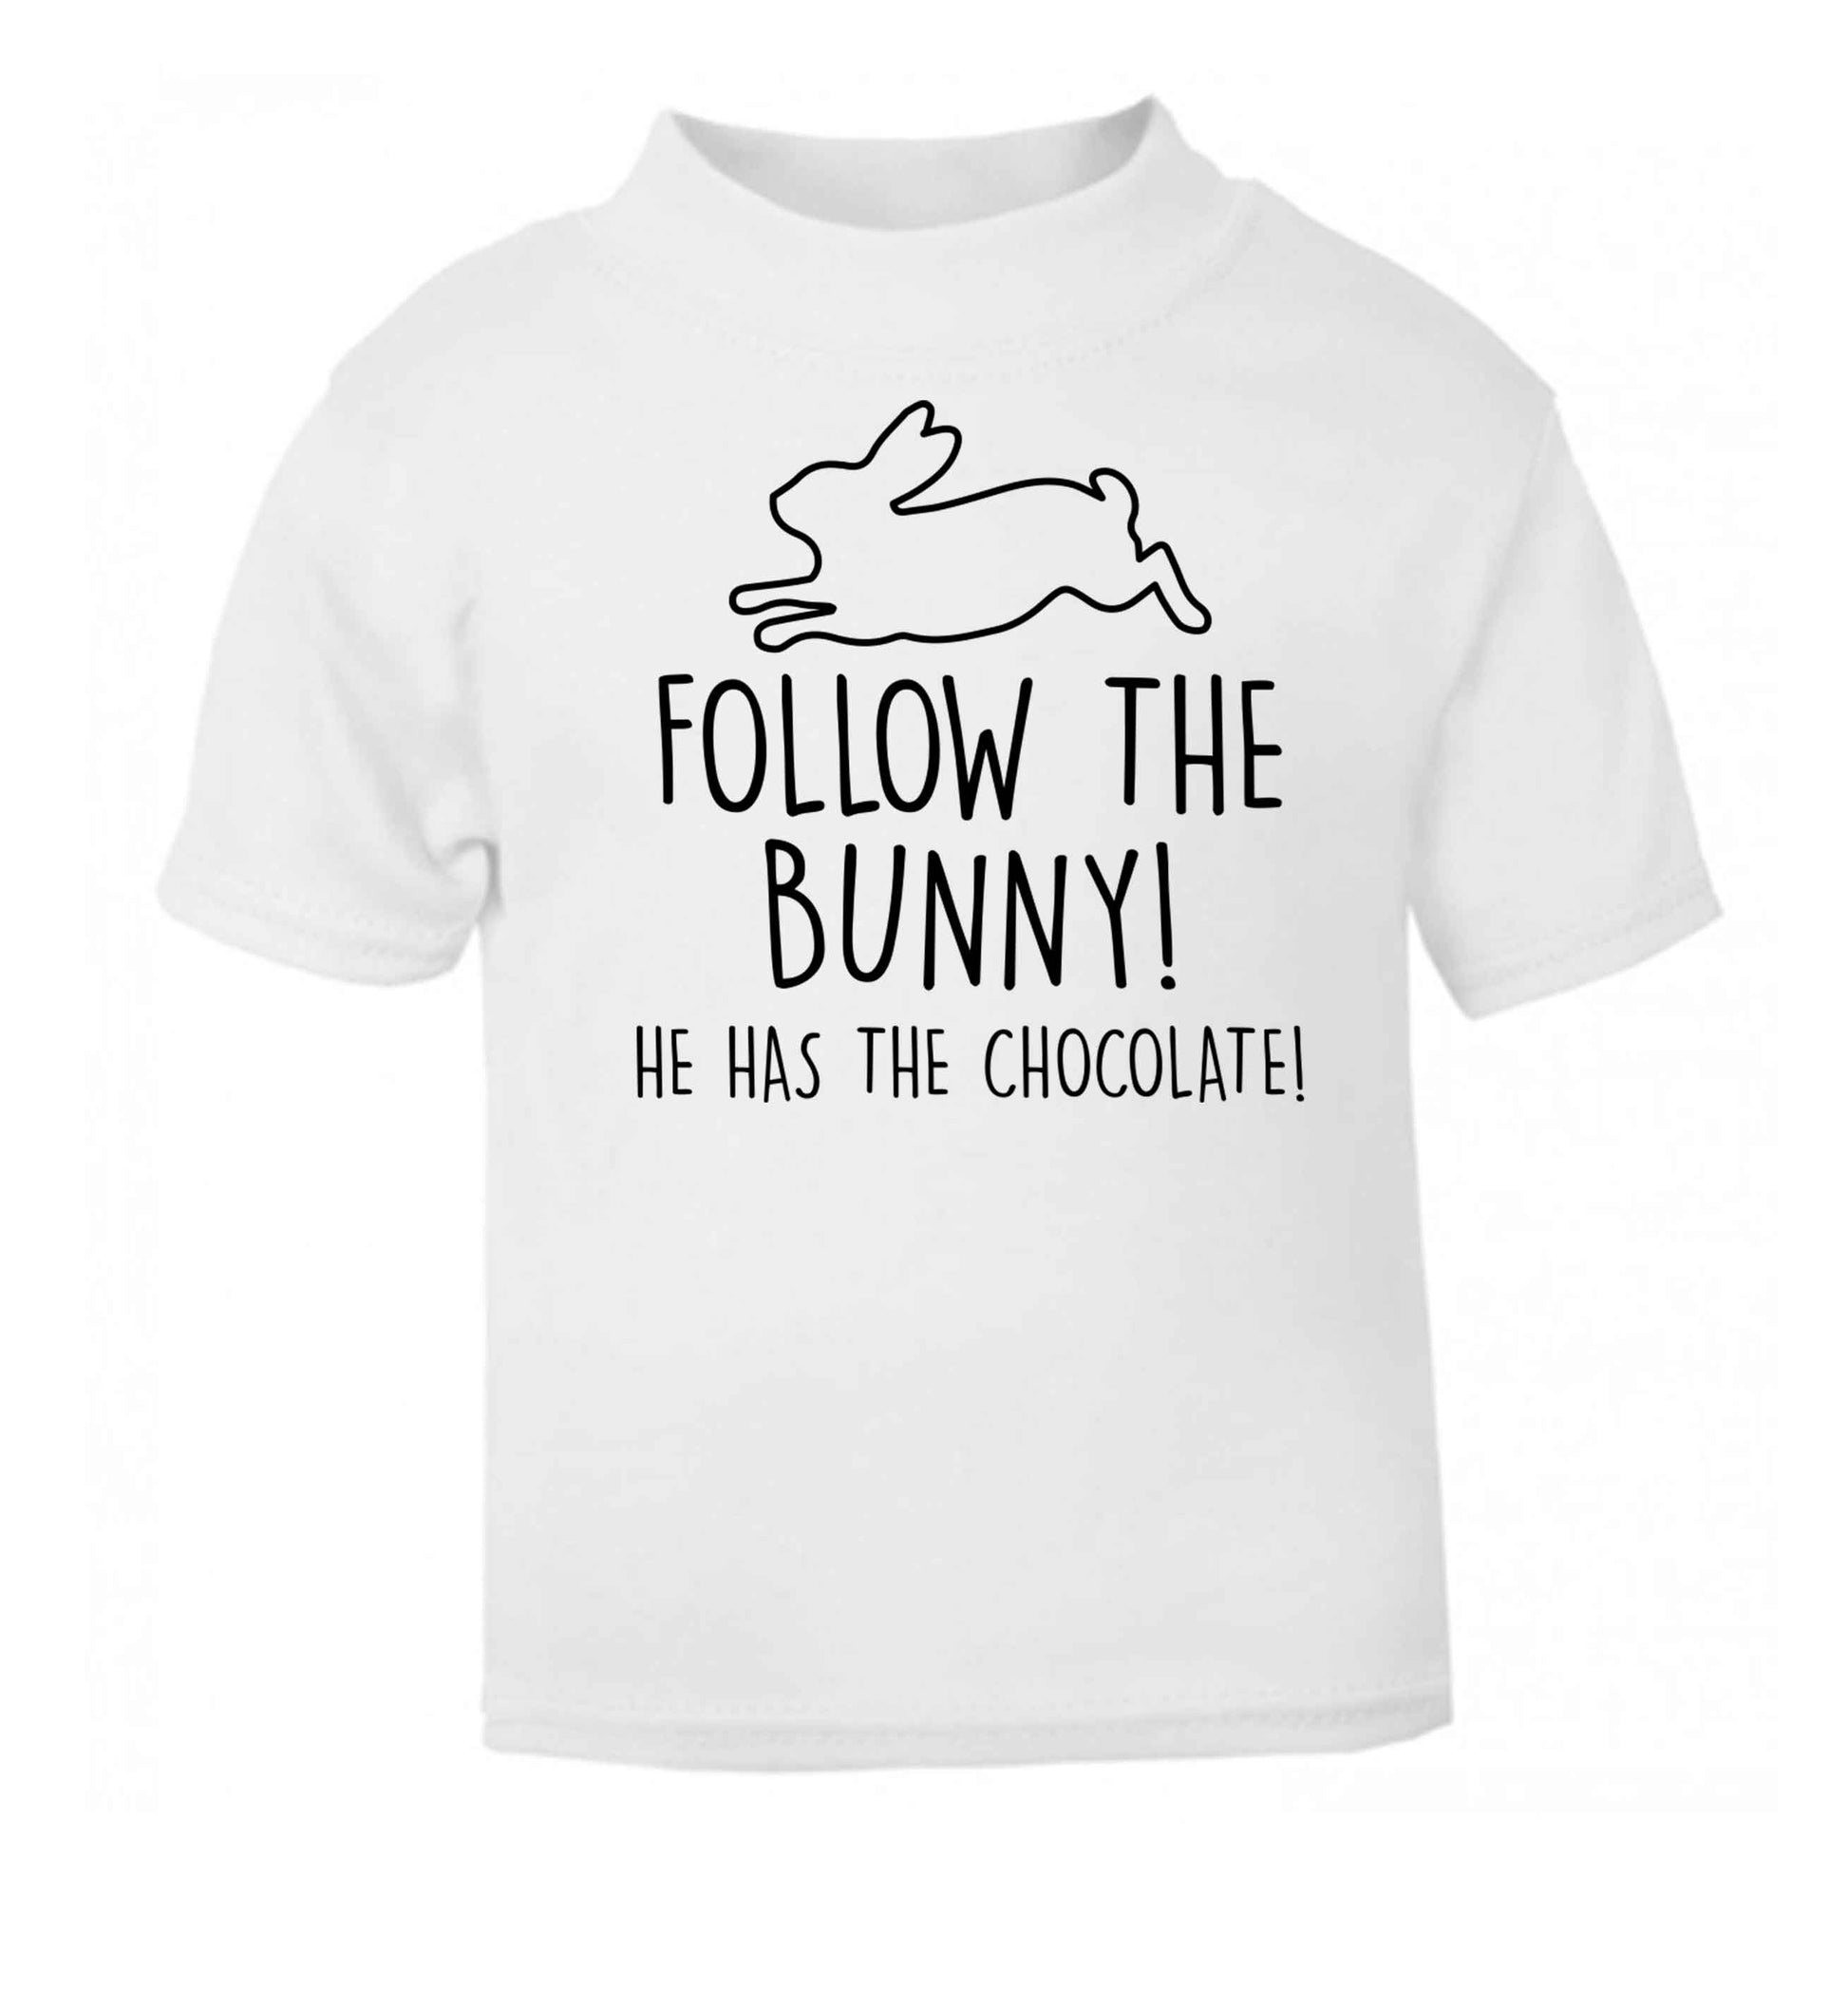 Follow the bunny! He has the chocolate white baby toddler Tshirt 2 Years